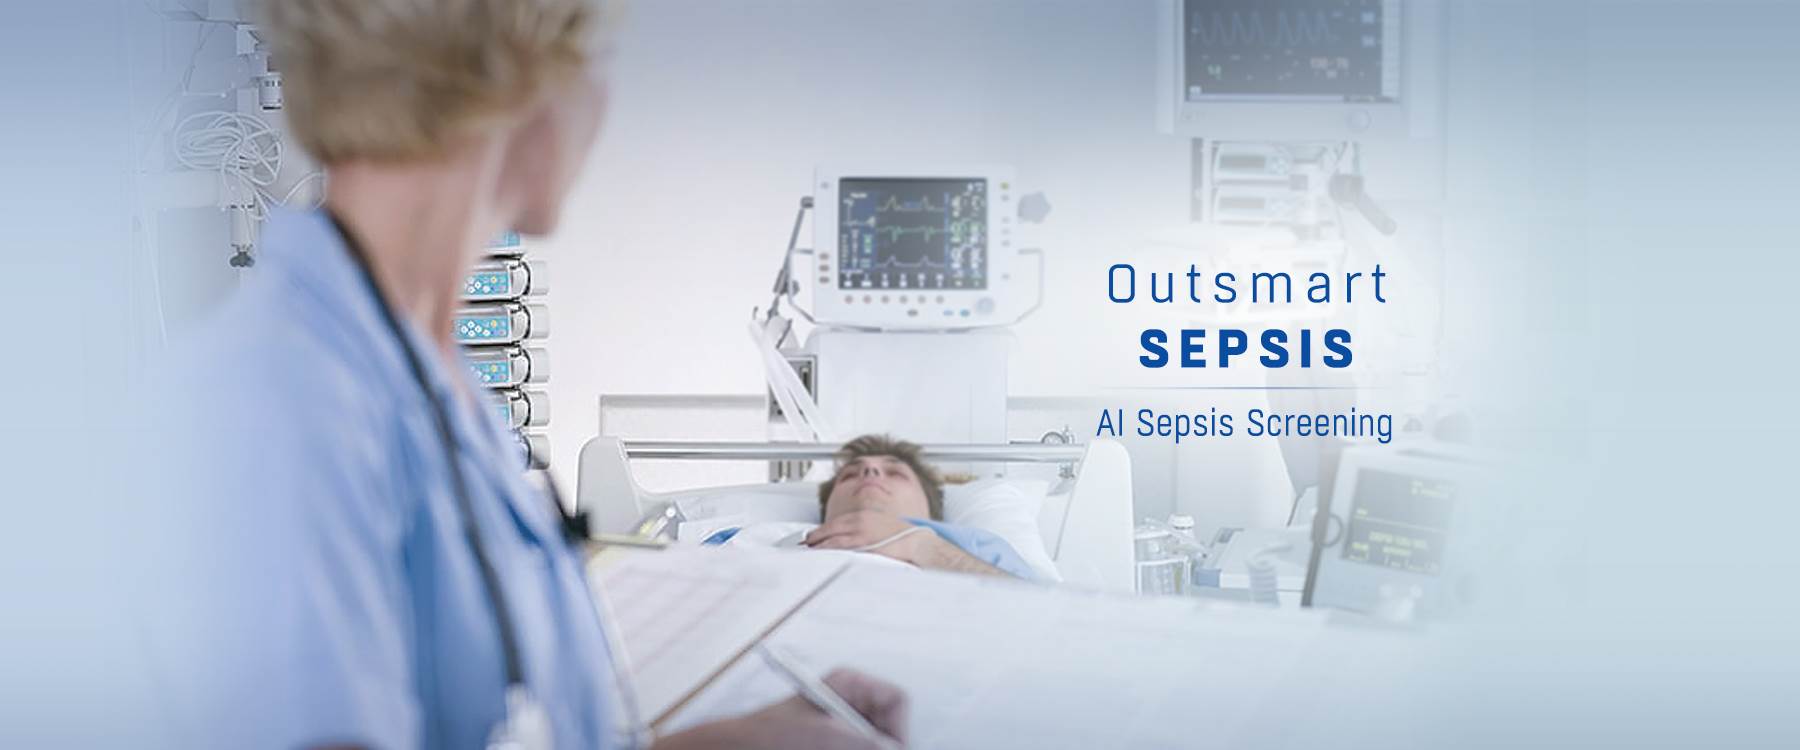 Outsmart Sepsis